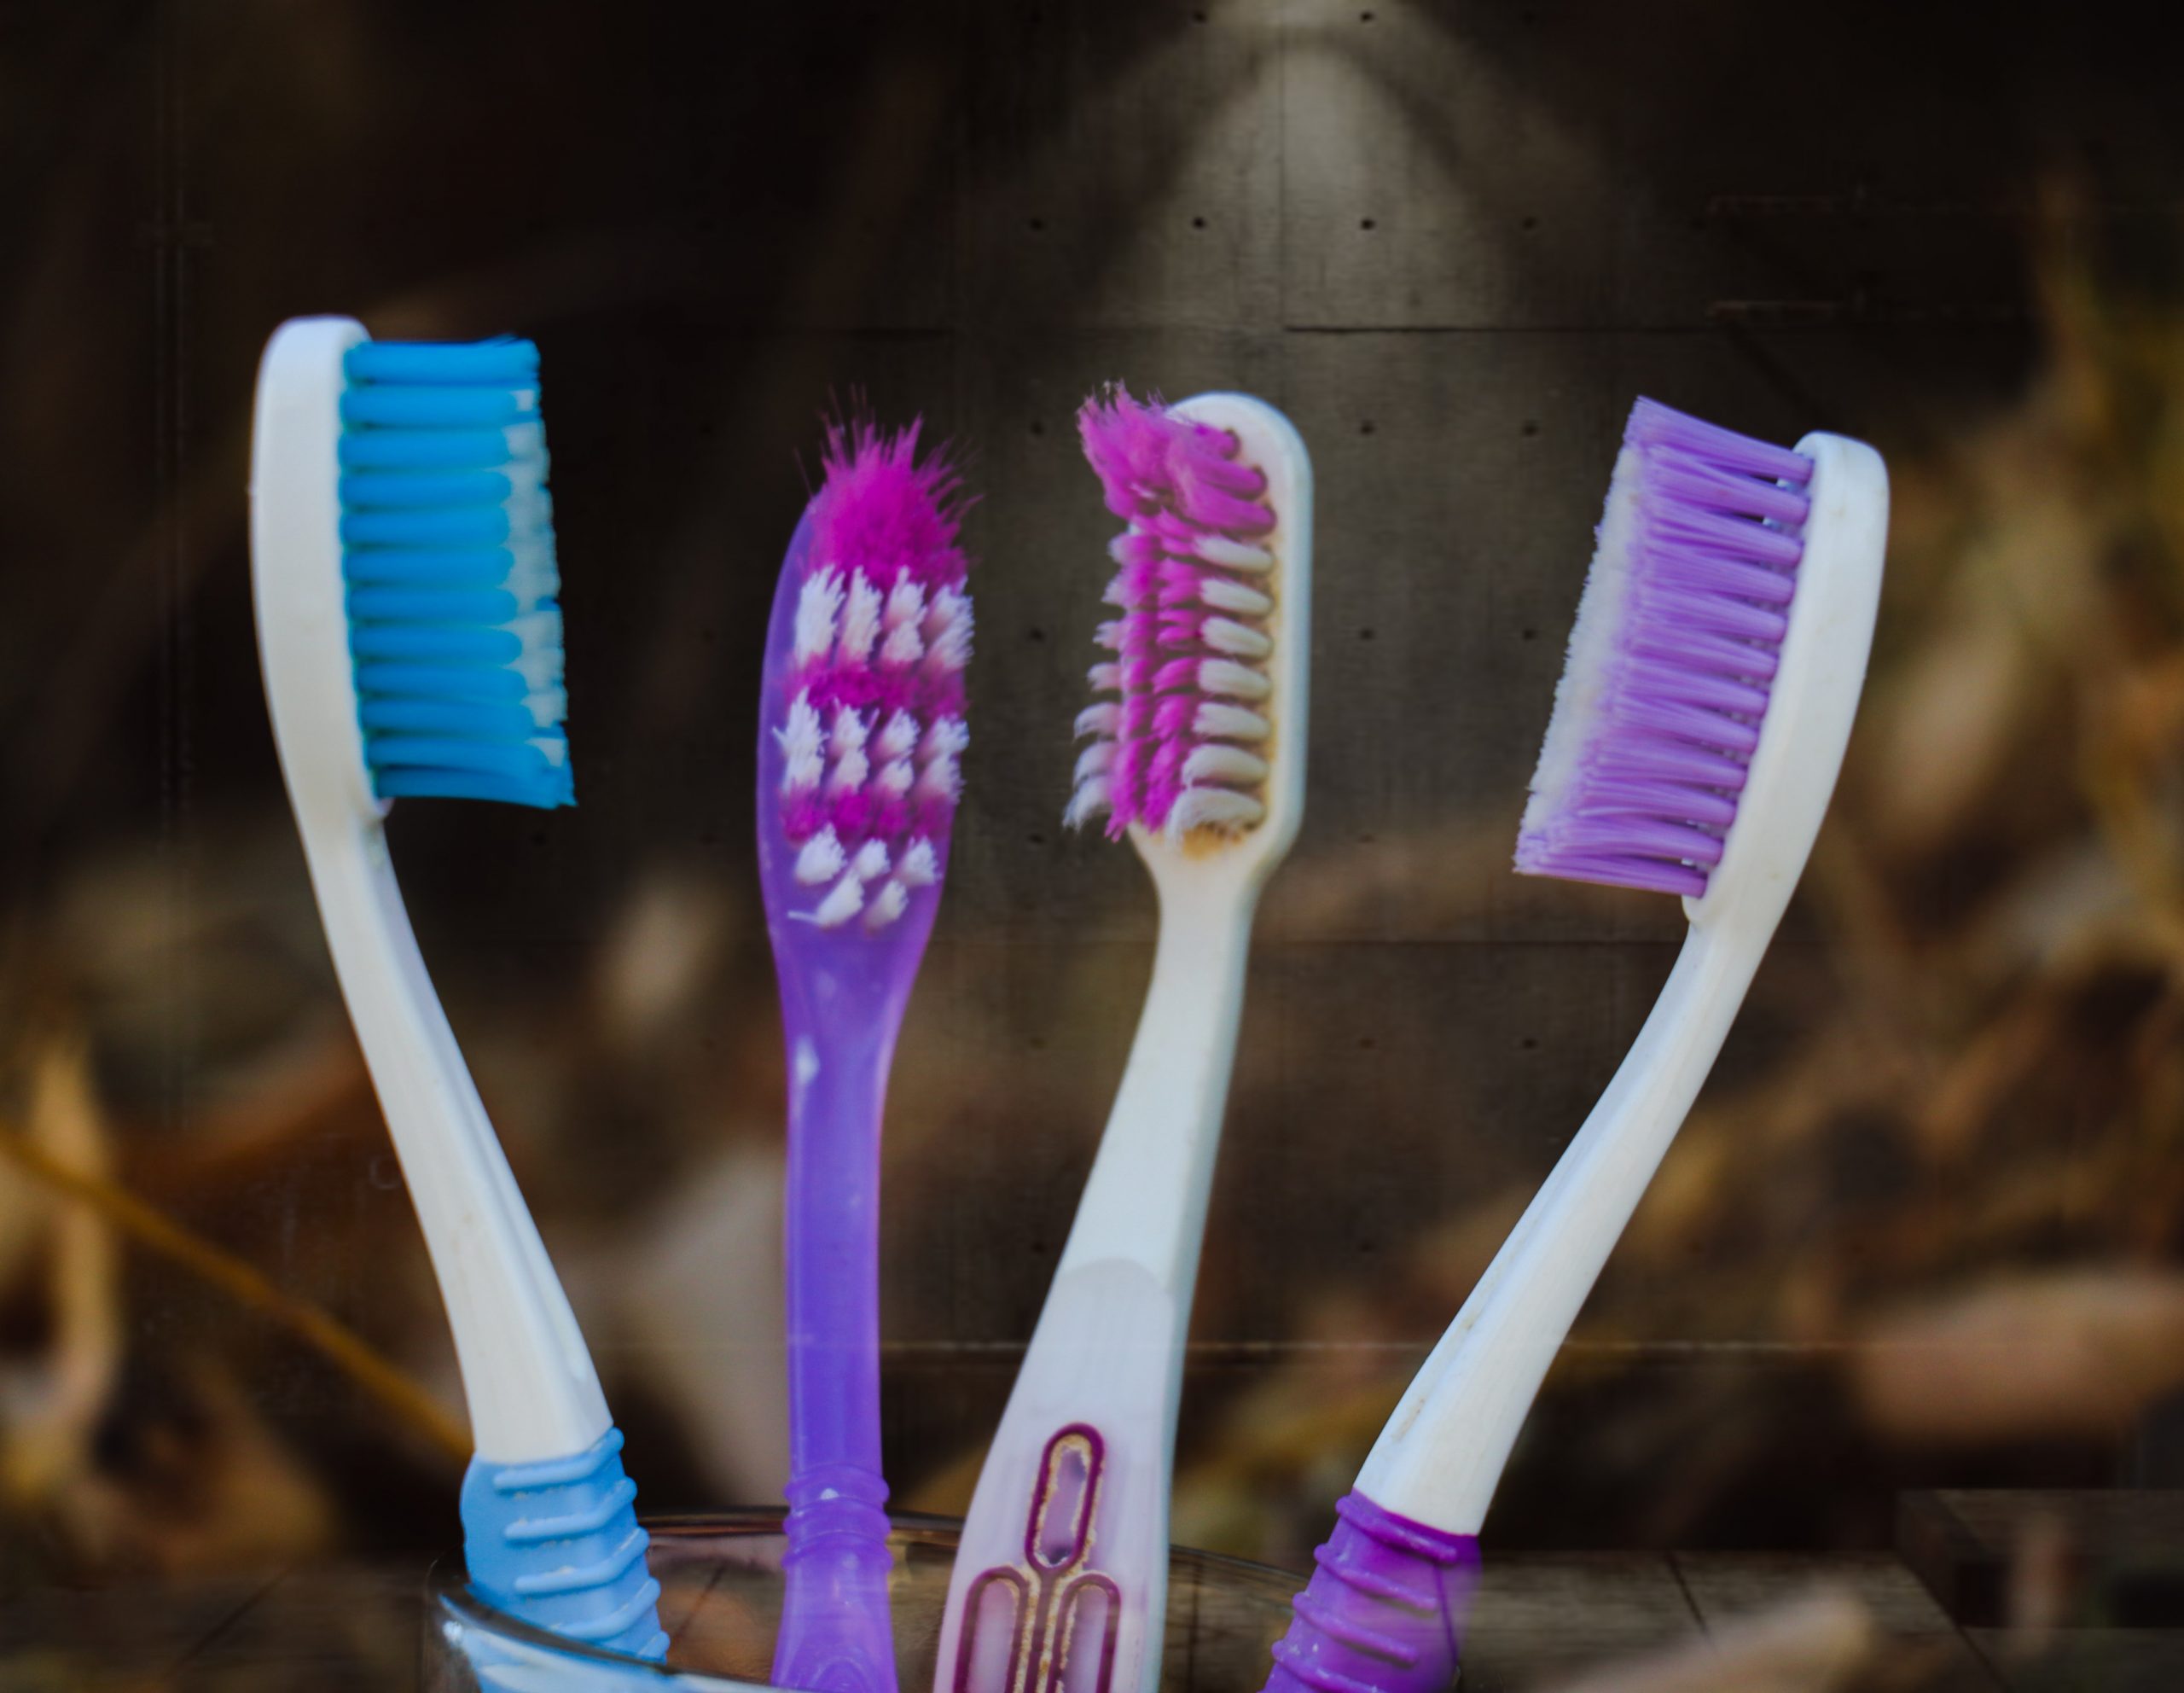 Toothbrush for oral health